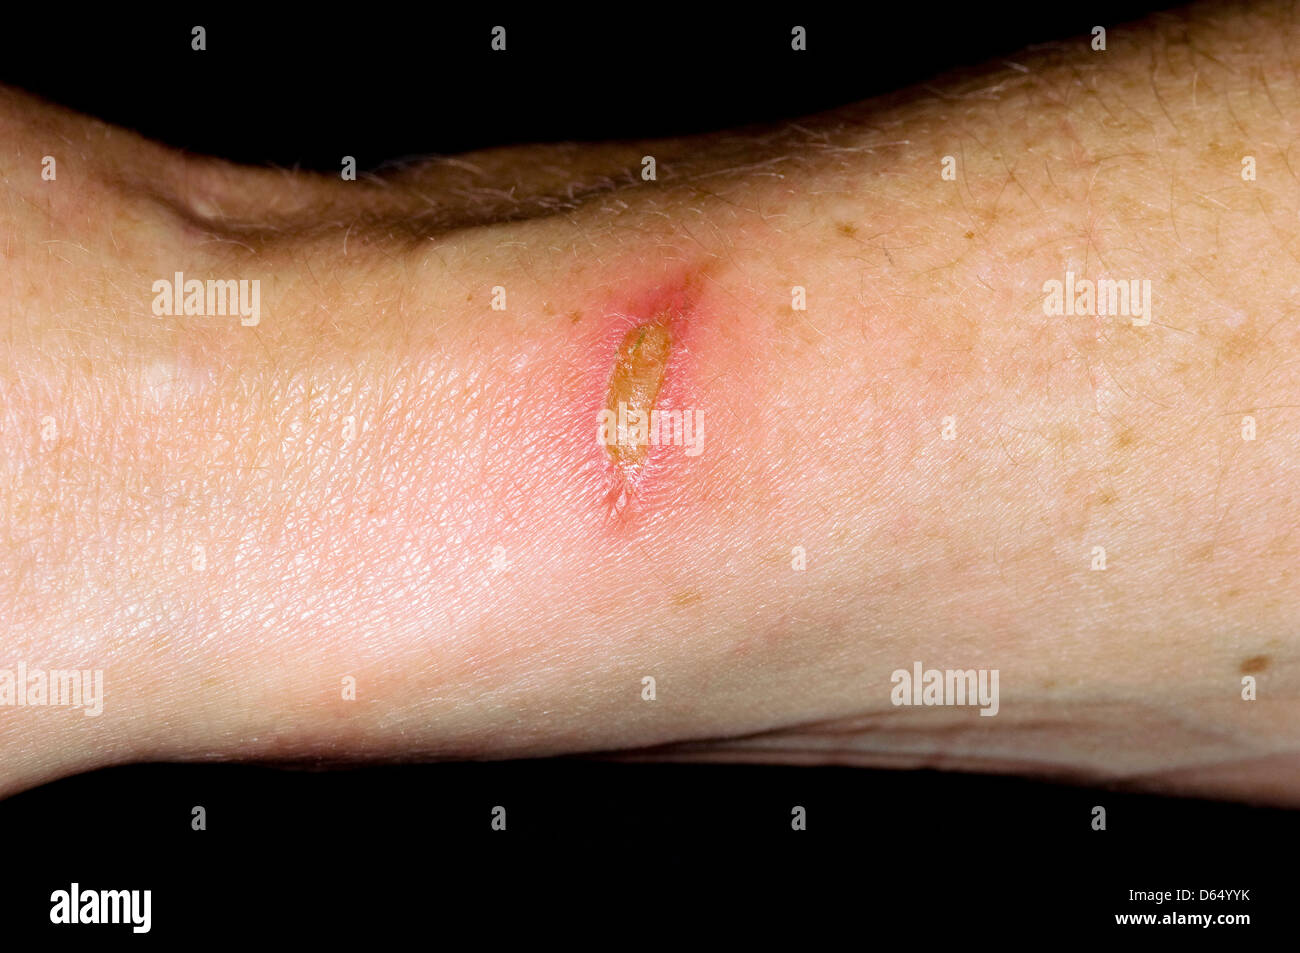 Infected burn Stock Photo